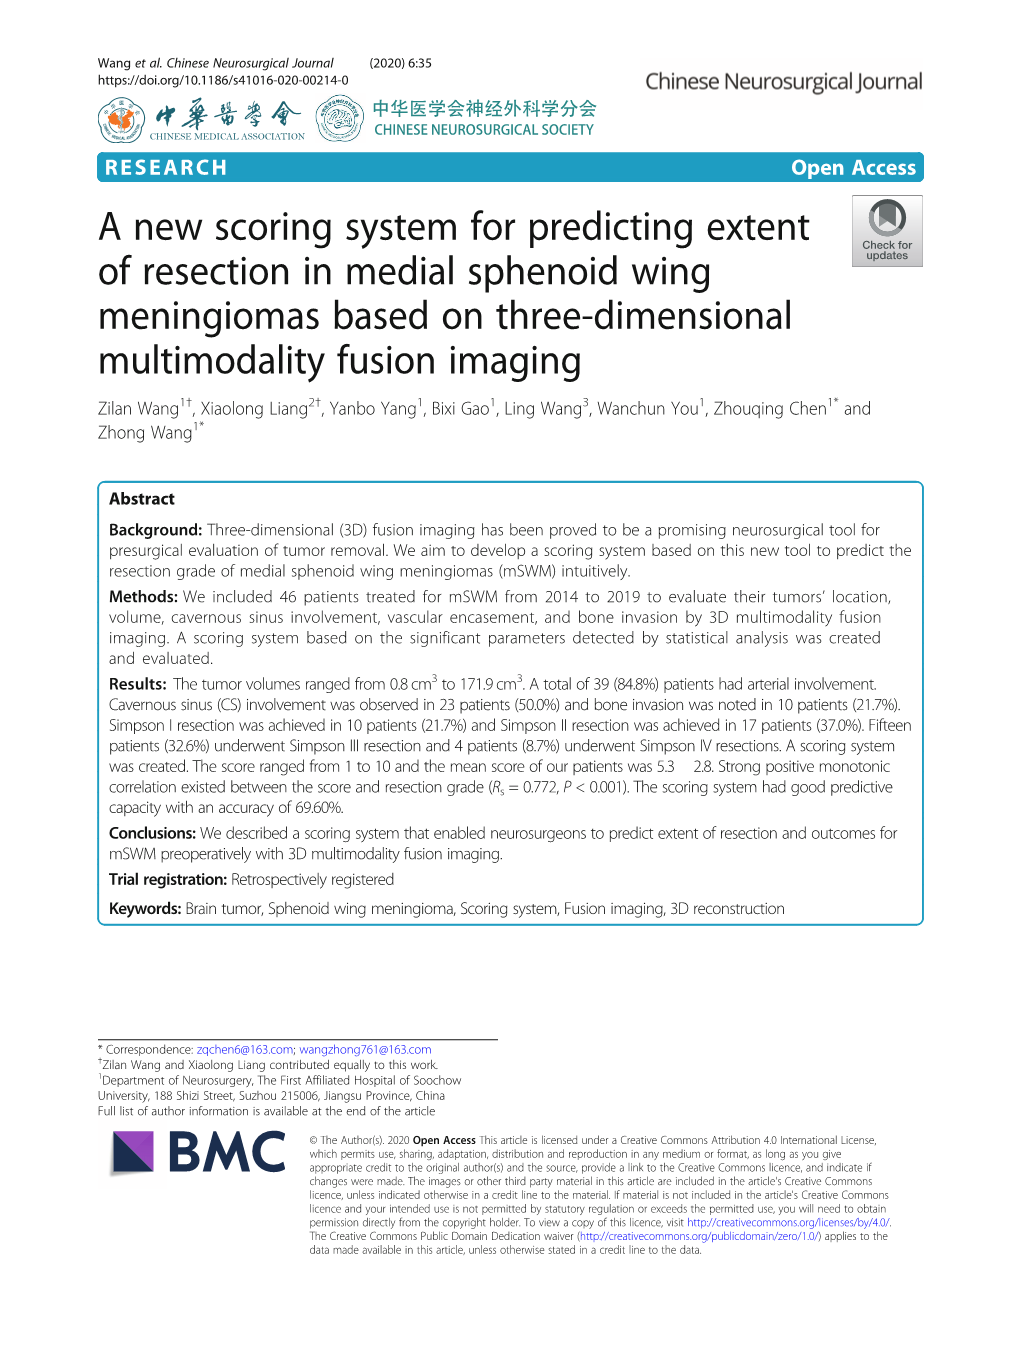 A New Scoring System for Predicting Extent of Resection in Medial